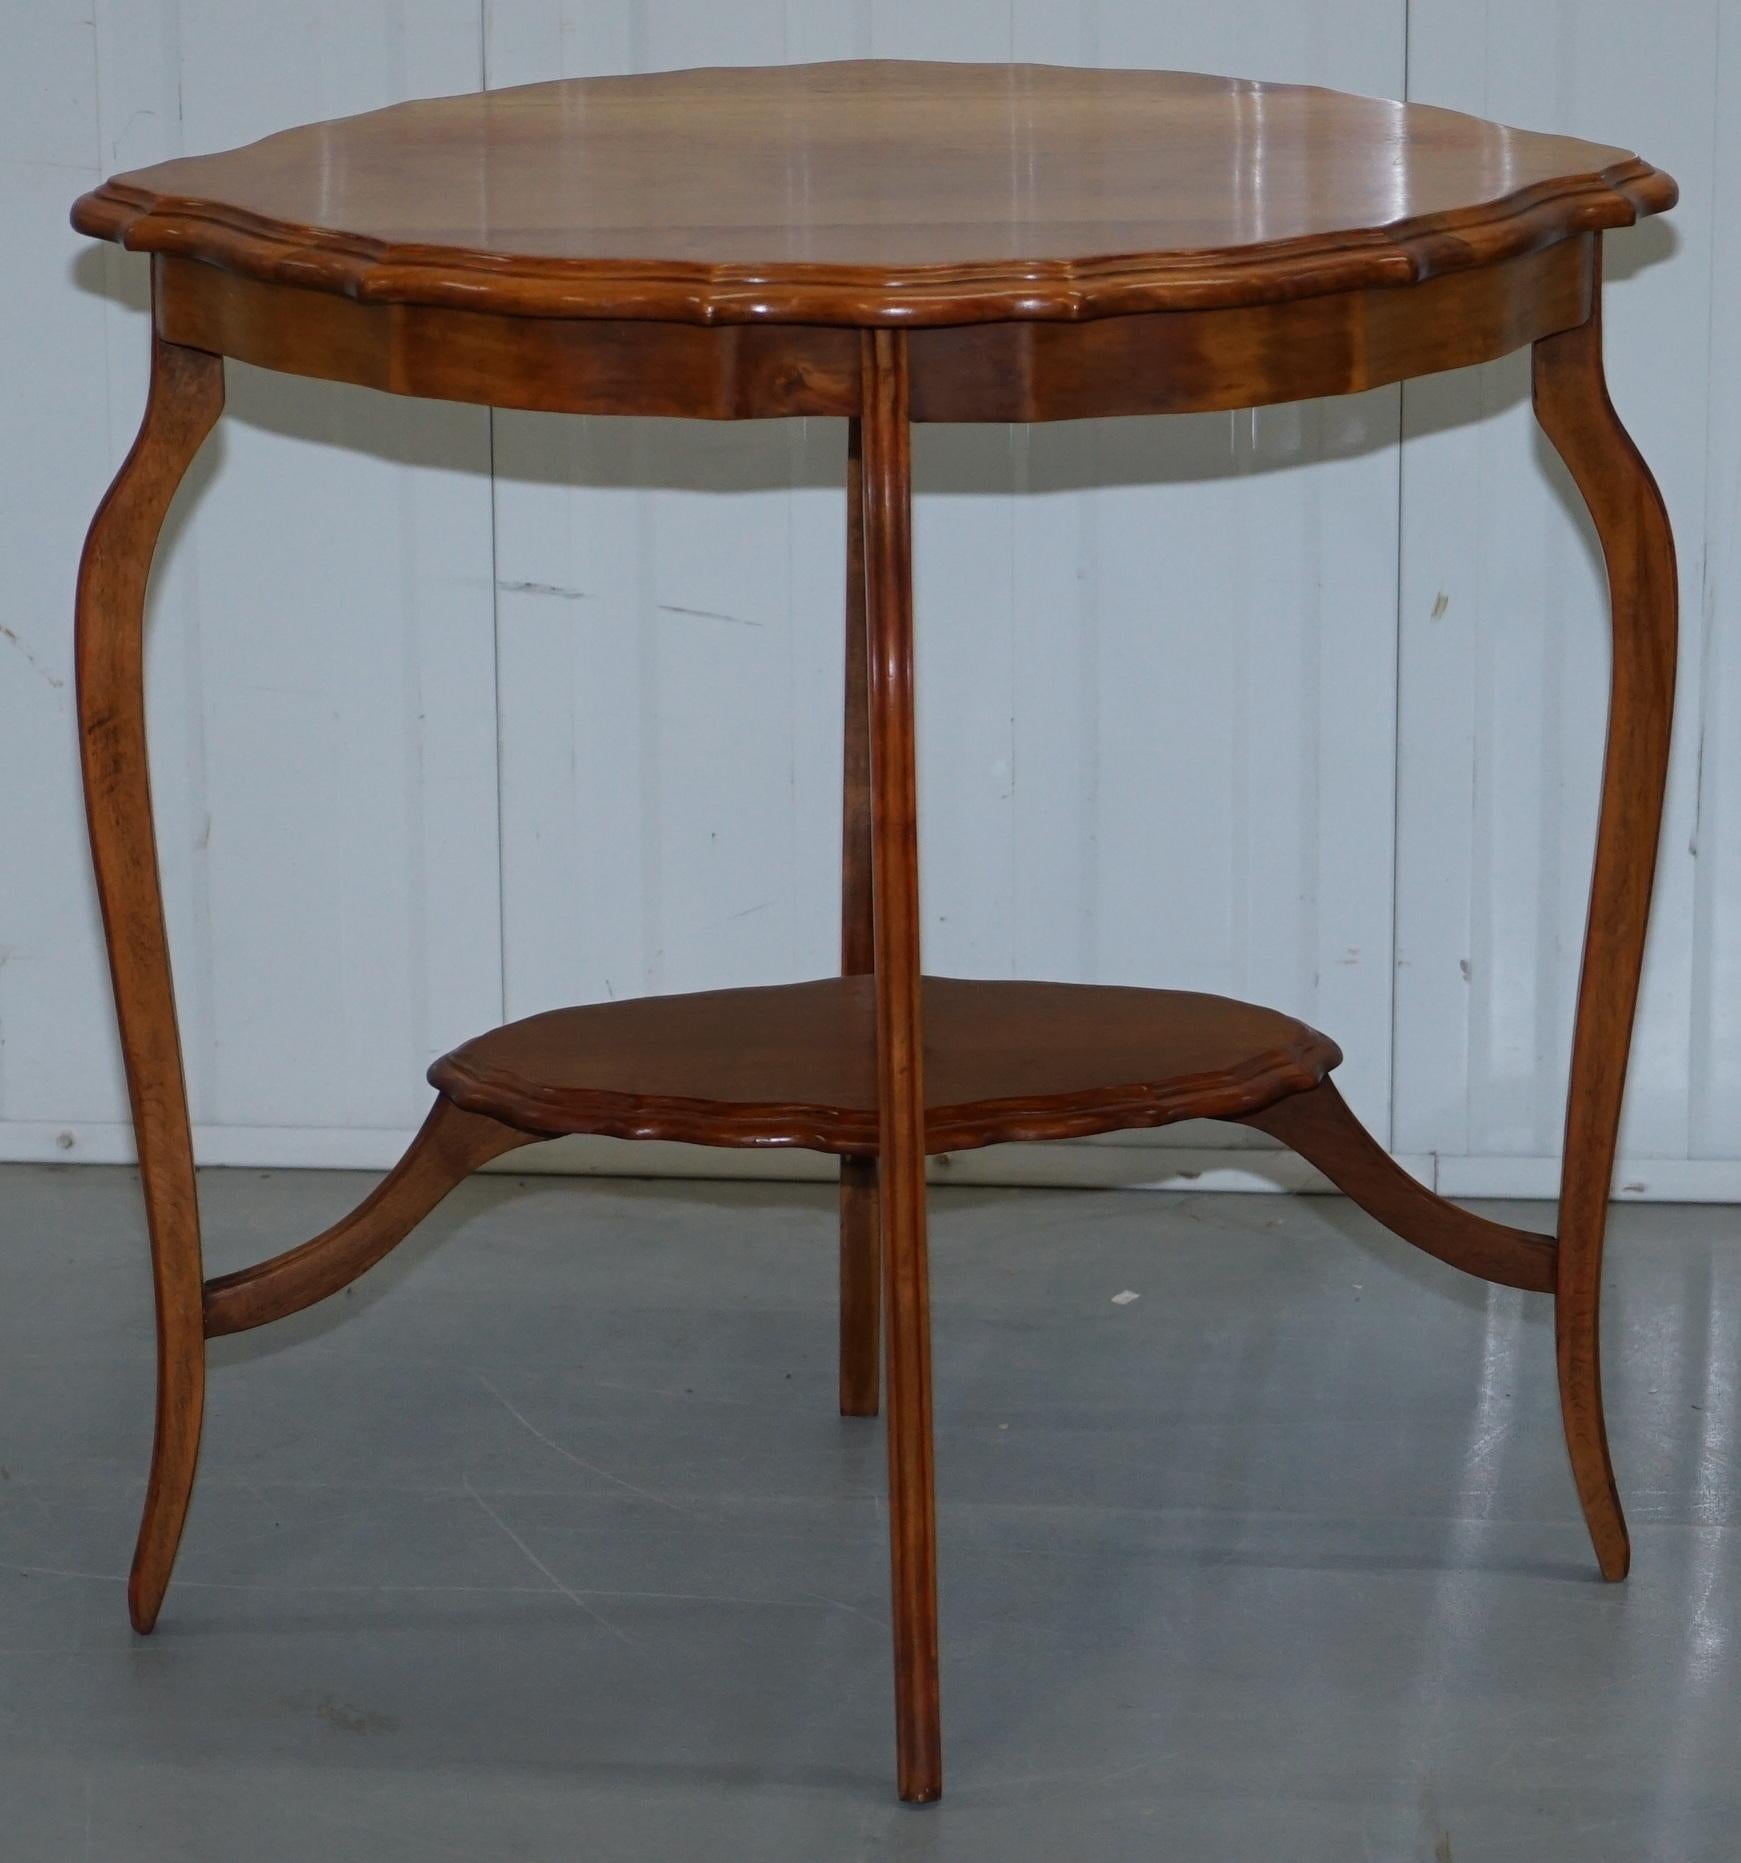 Lovely Decorative Satinwood Occasional Centre Table Scalloped Edge Ornate Legs For Sale 8